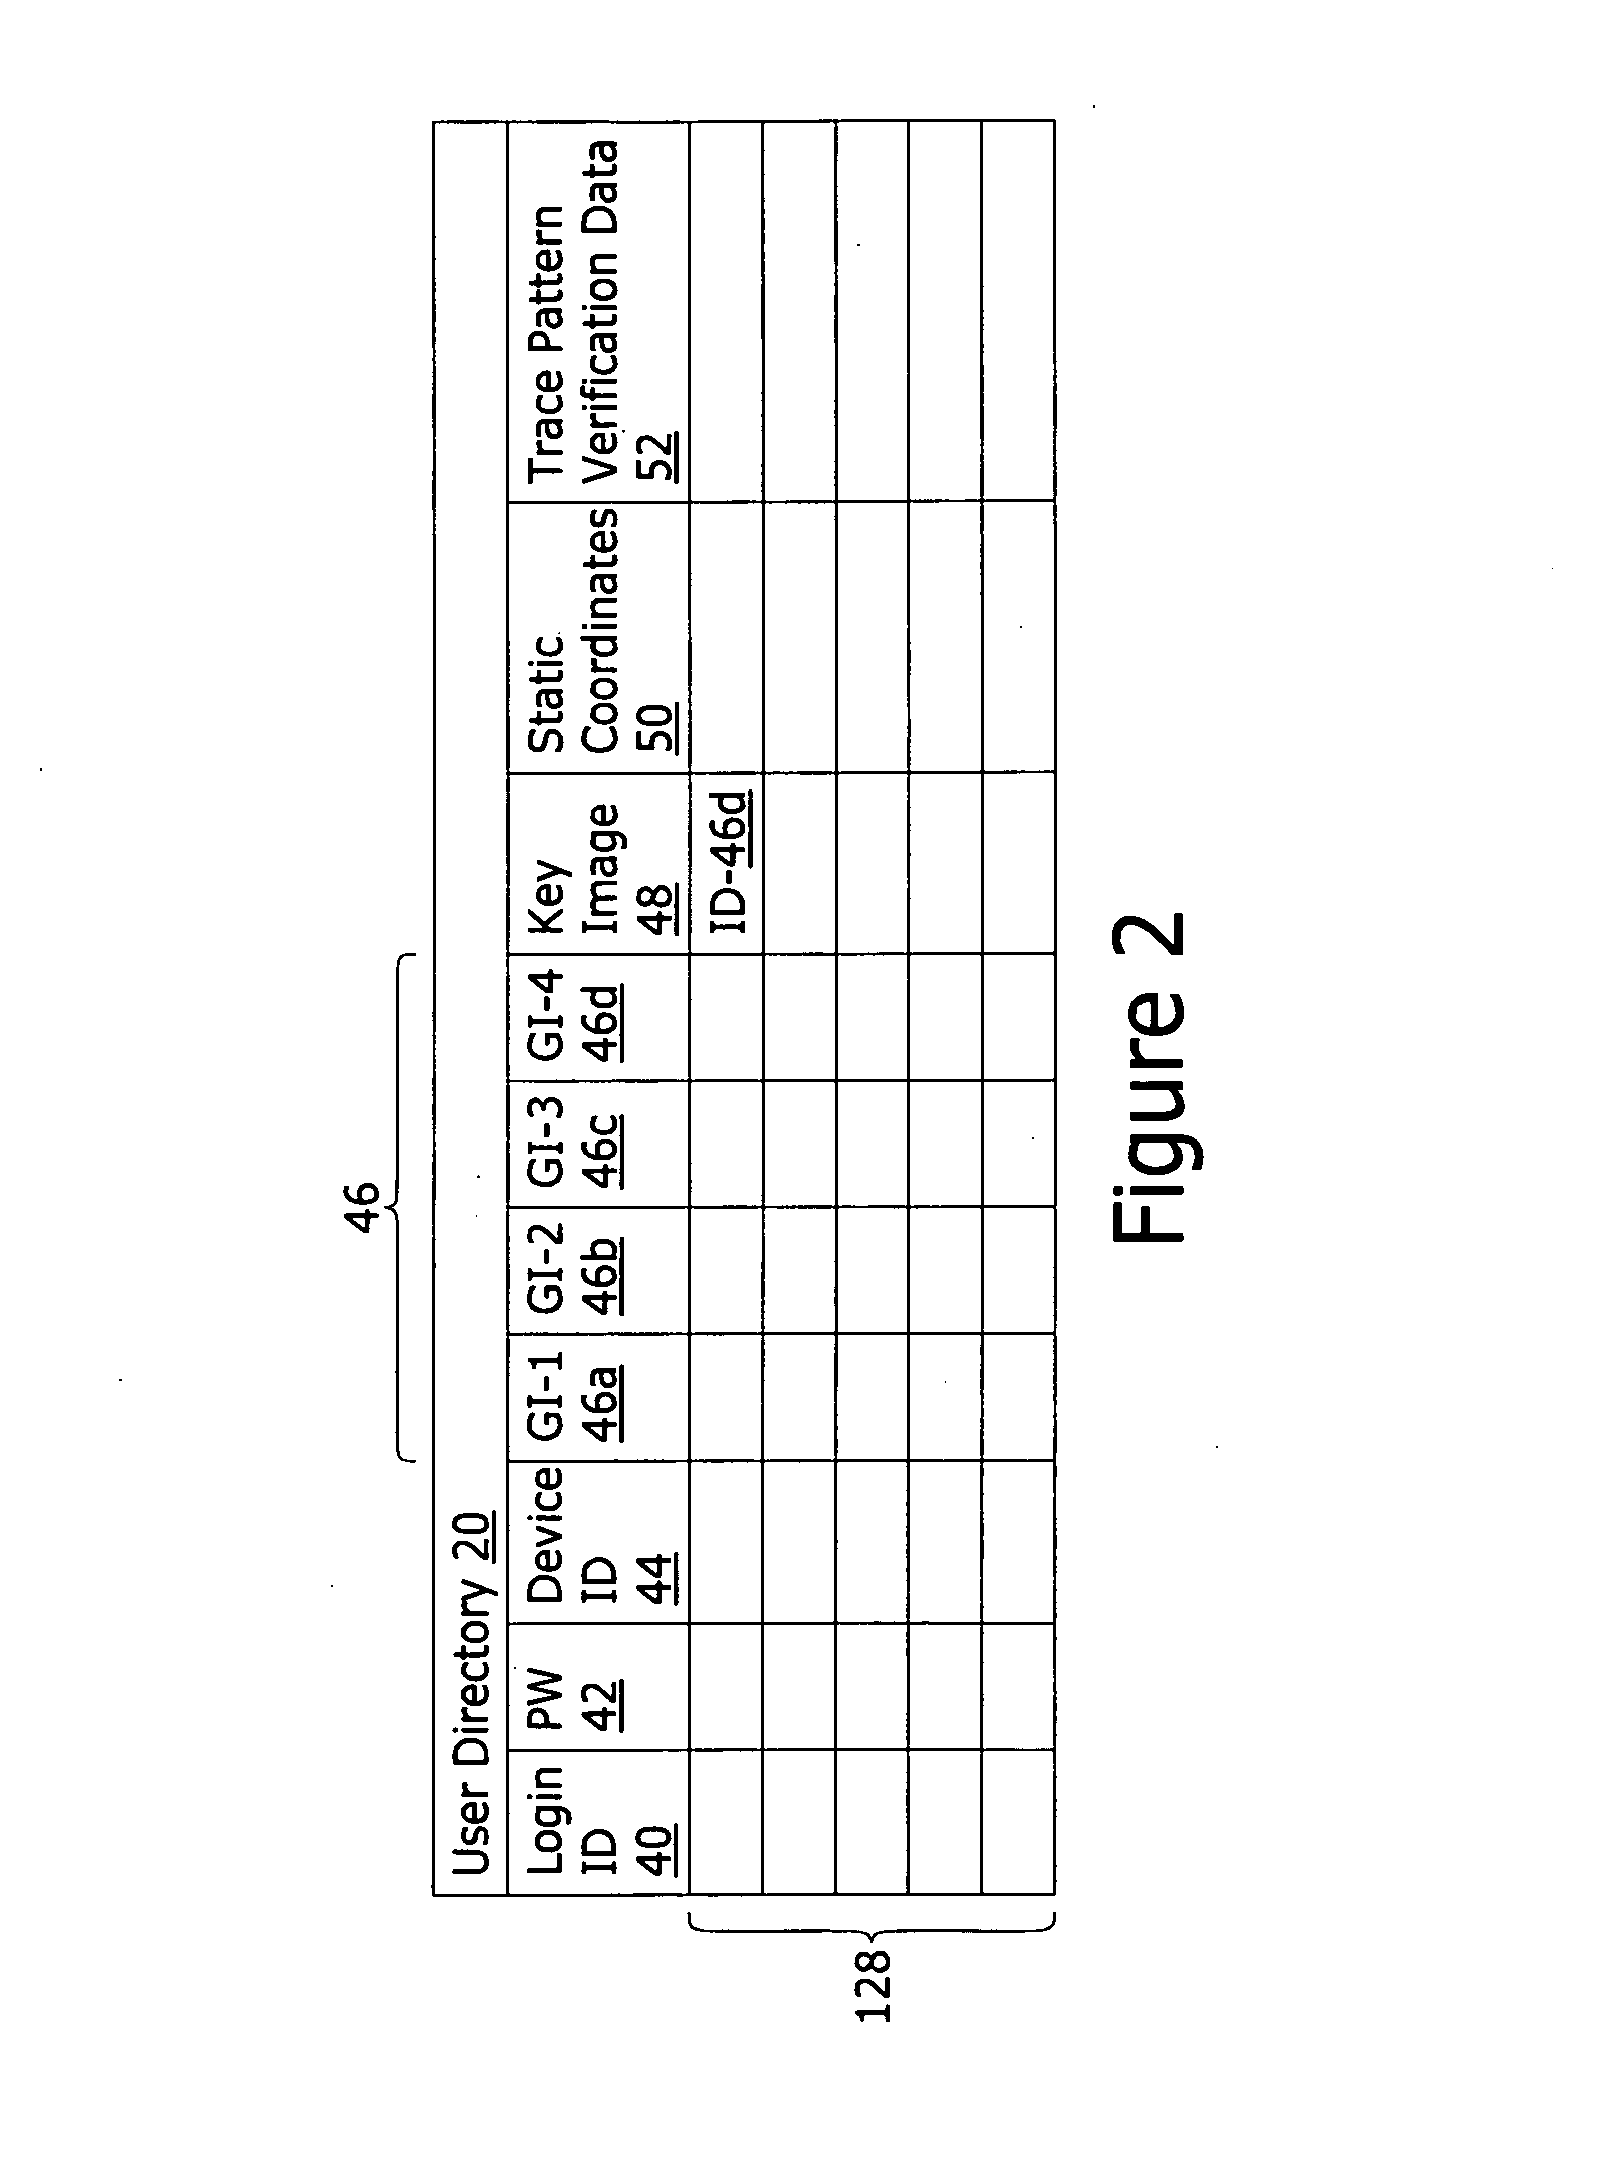 Mobile application security system and method